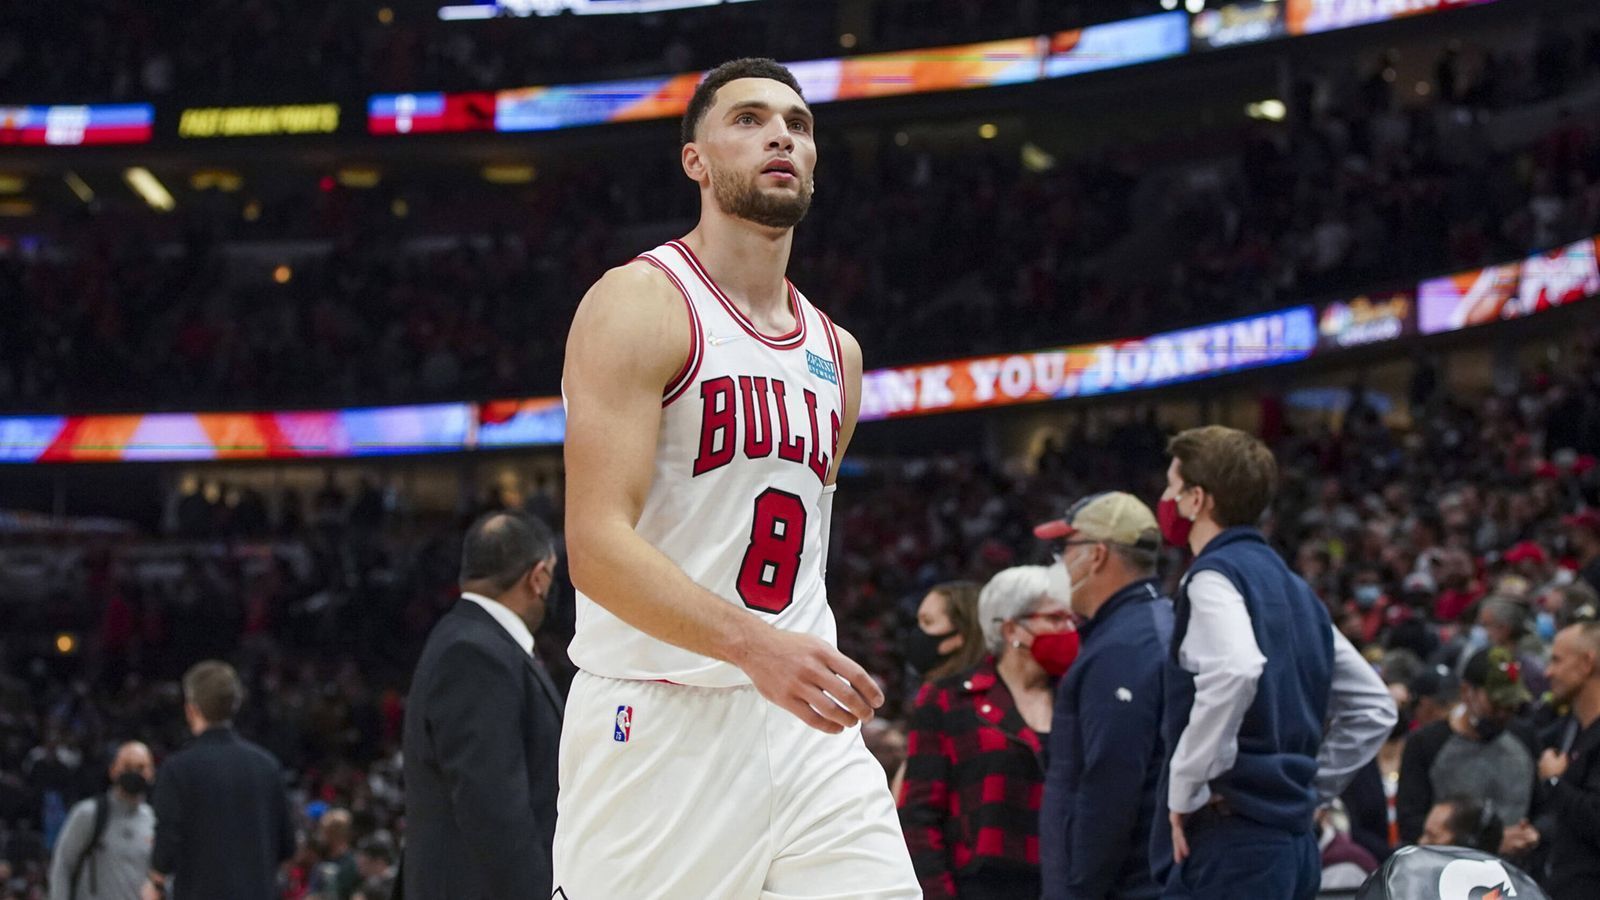 
                <strong>Zach LaVine (Chicago Bulls/Reserve)</strong><br>
                &#x2022; Punkte: 24,6 -<br>&#x2022; Rebounds: 4,9 -<br>&#x2022; Assists: 4,5 -<br>&#x2022; All-Star Nominierungen: 2. <br>
              